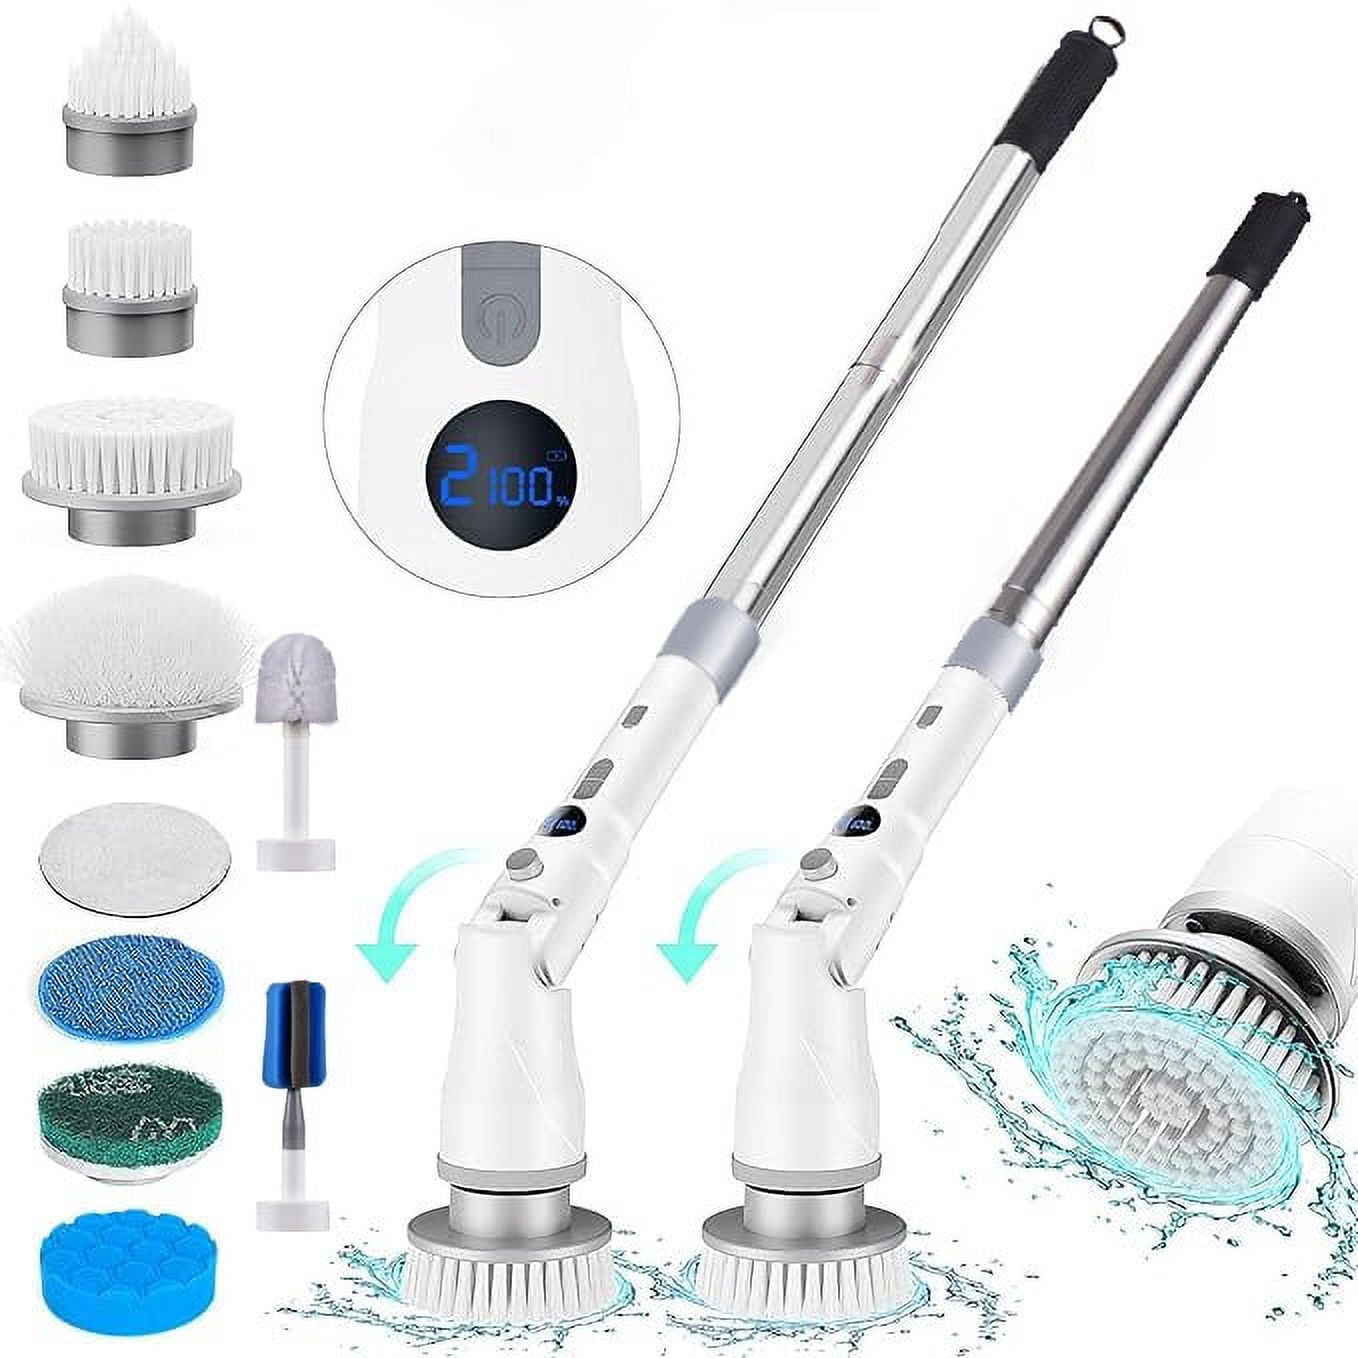 Electric Spin Scrubber, WKY Cordless Power Shower Scrubber, 6 Brushes Heads for Cleaning Shower Bathroom Bathtub Tile Tub Floor, 2 Speeds